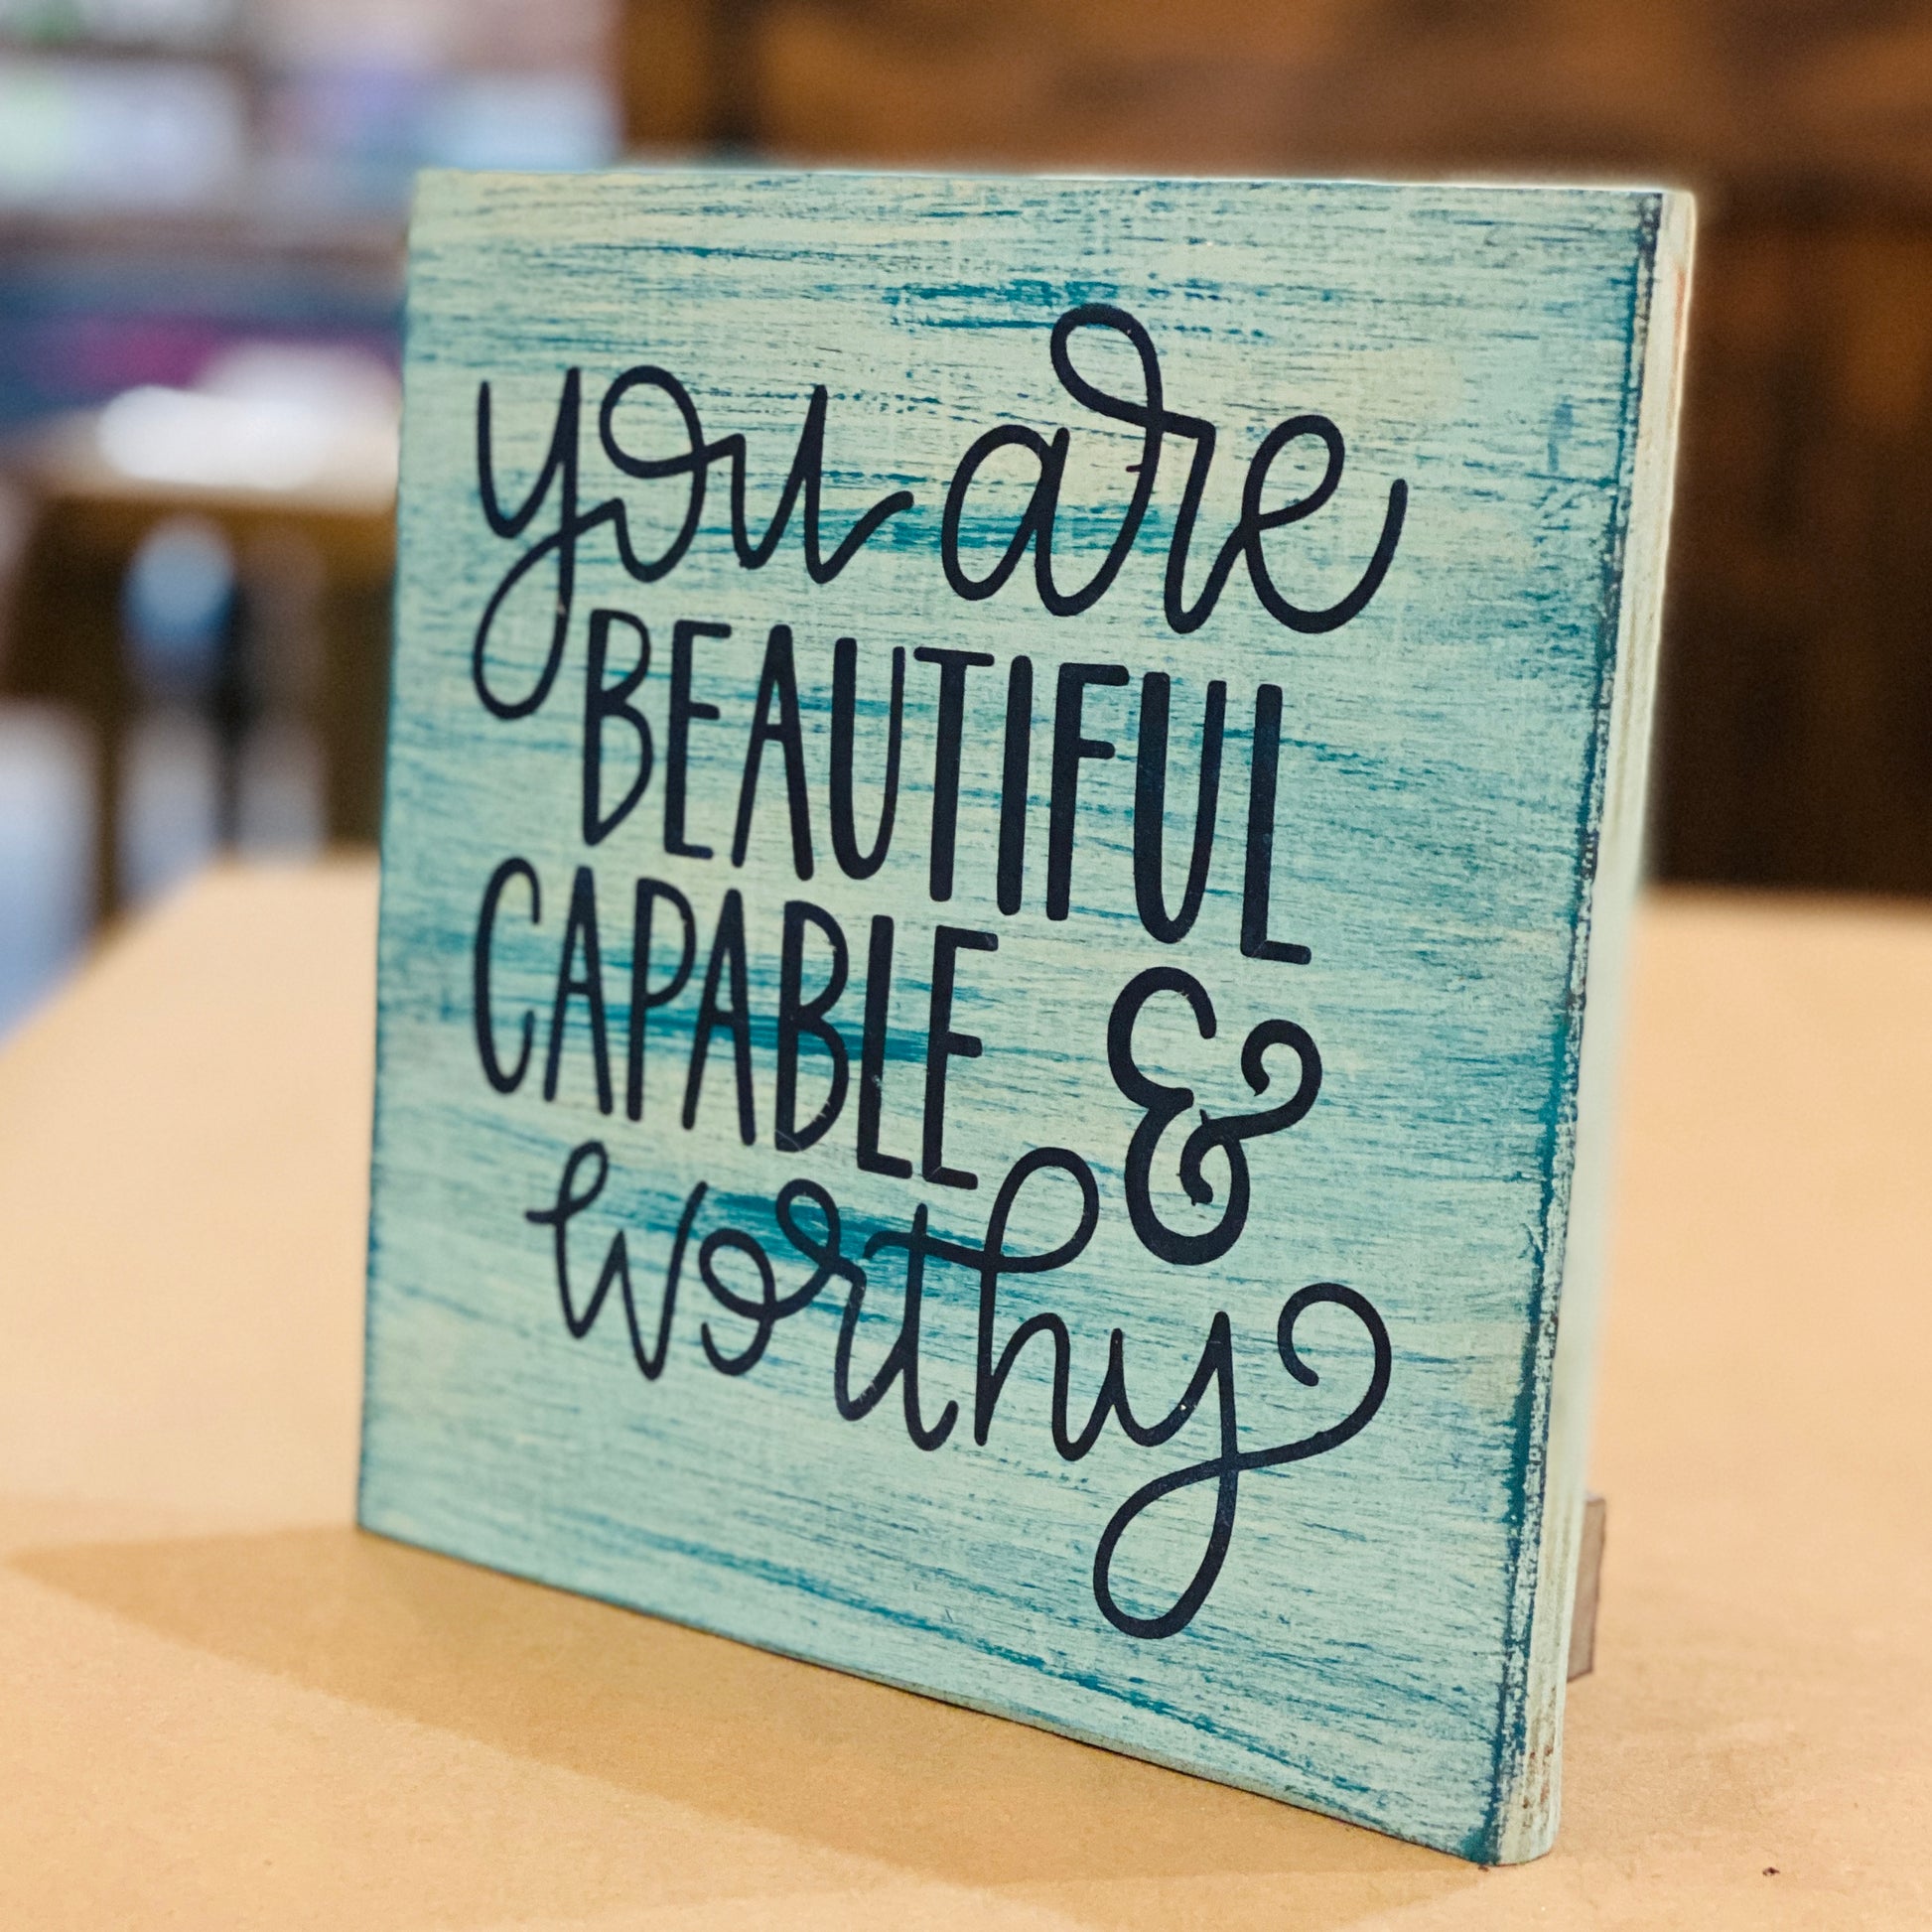 You are Beautiful Capable and Worthy: MINI DESIGN - Paisley Grace Makery